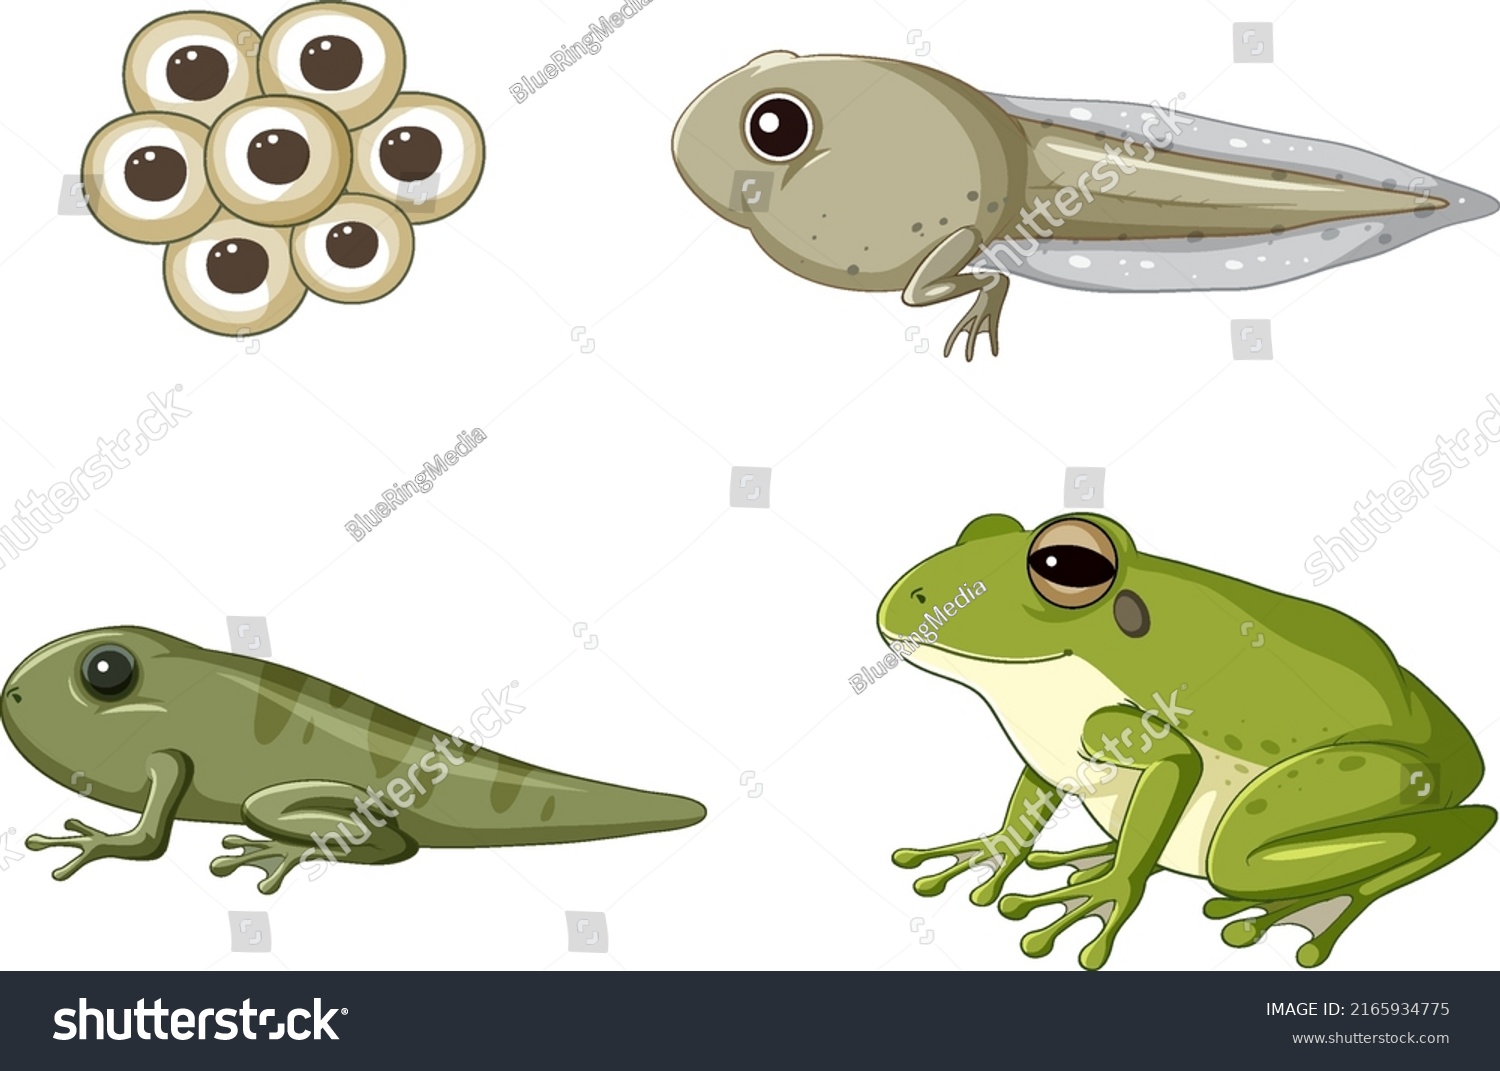 Frog Life Cycle Diagram Illustration Stock Vector (Royalty Free ...